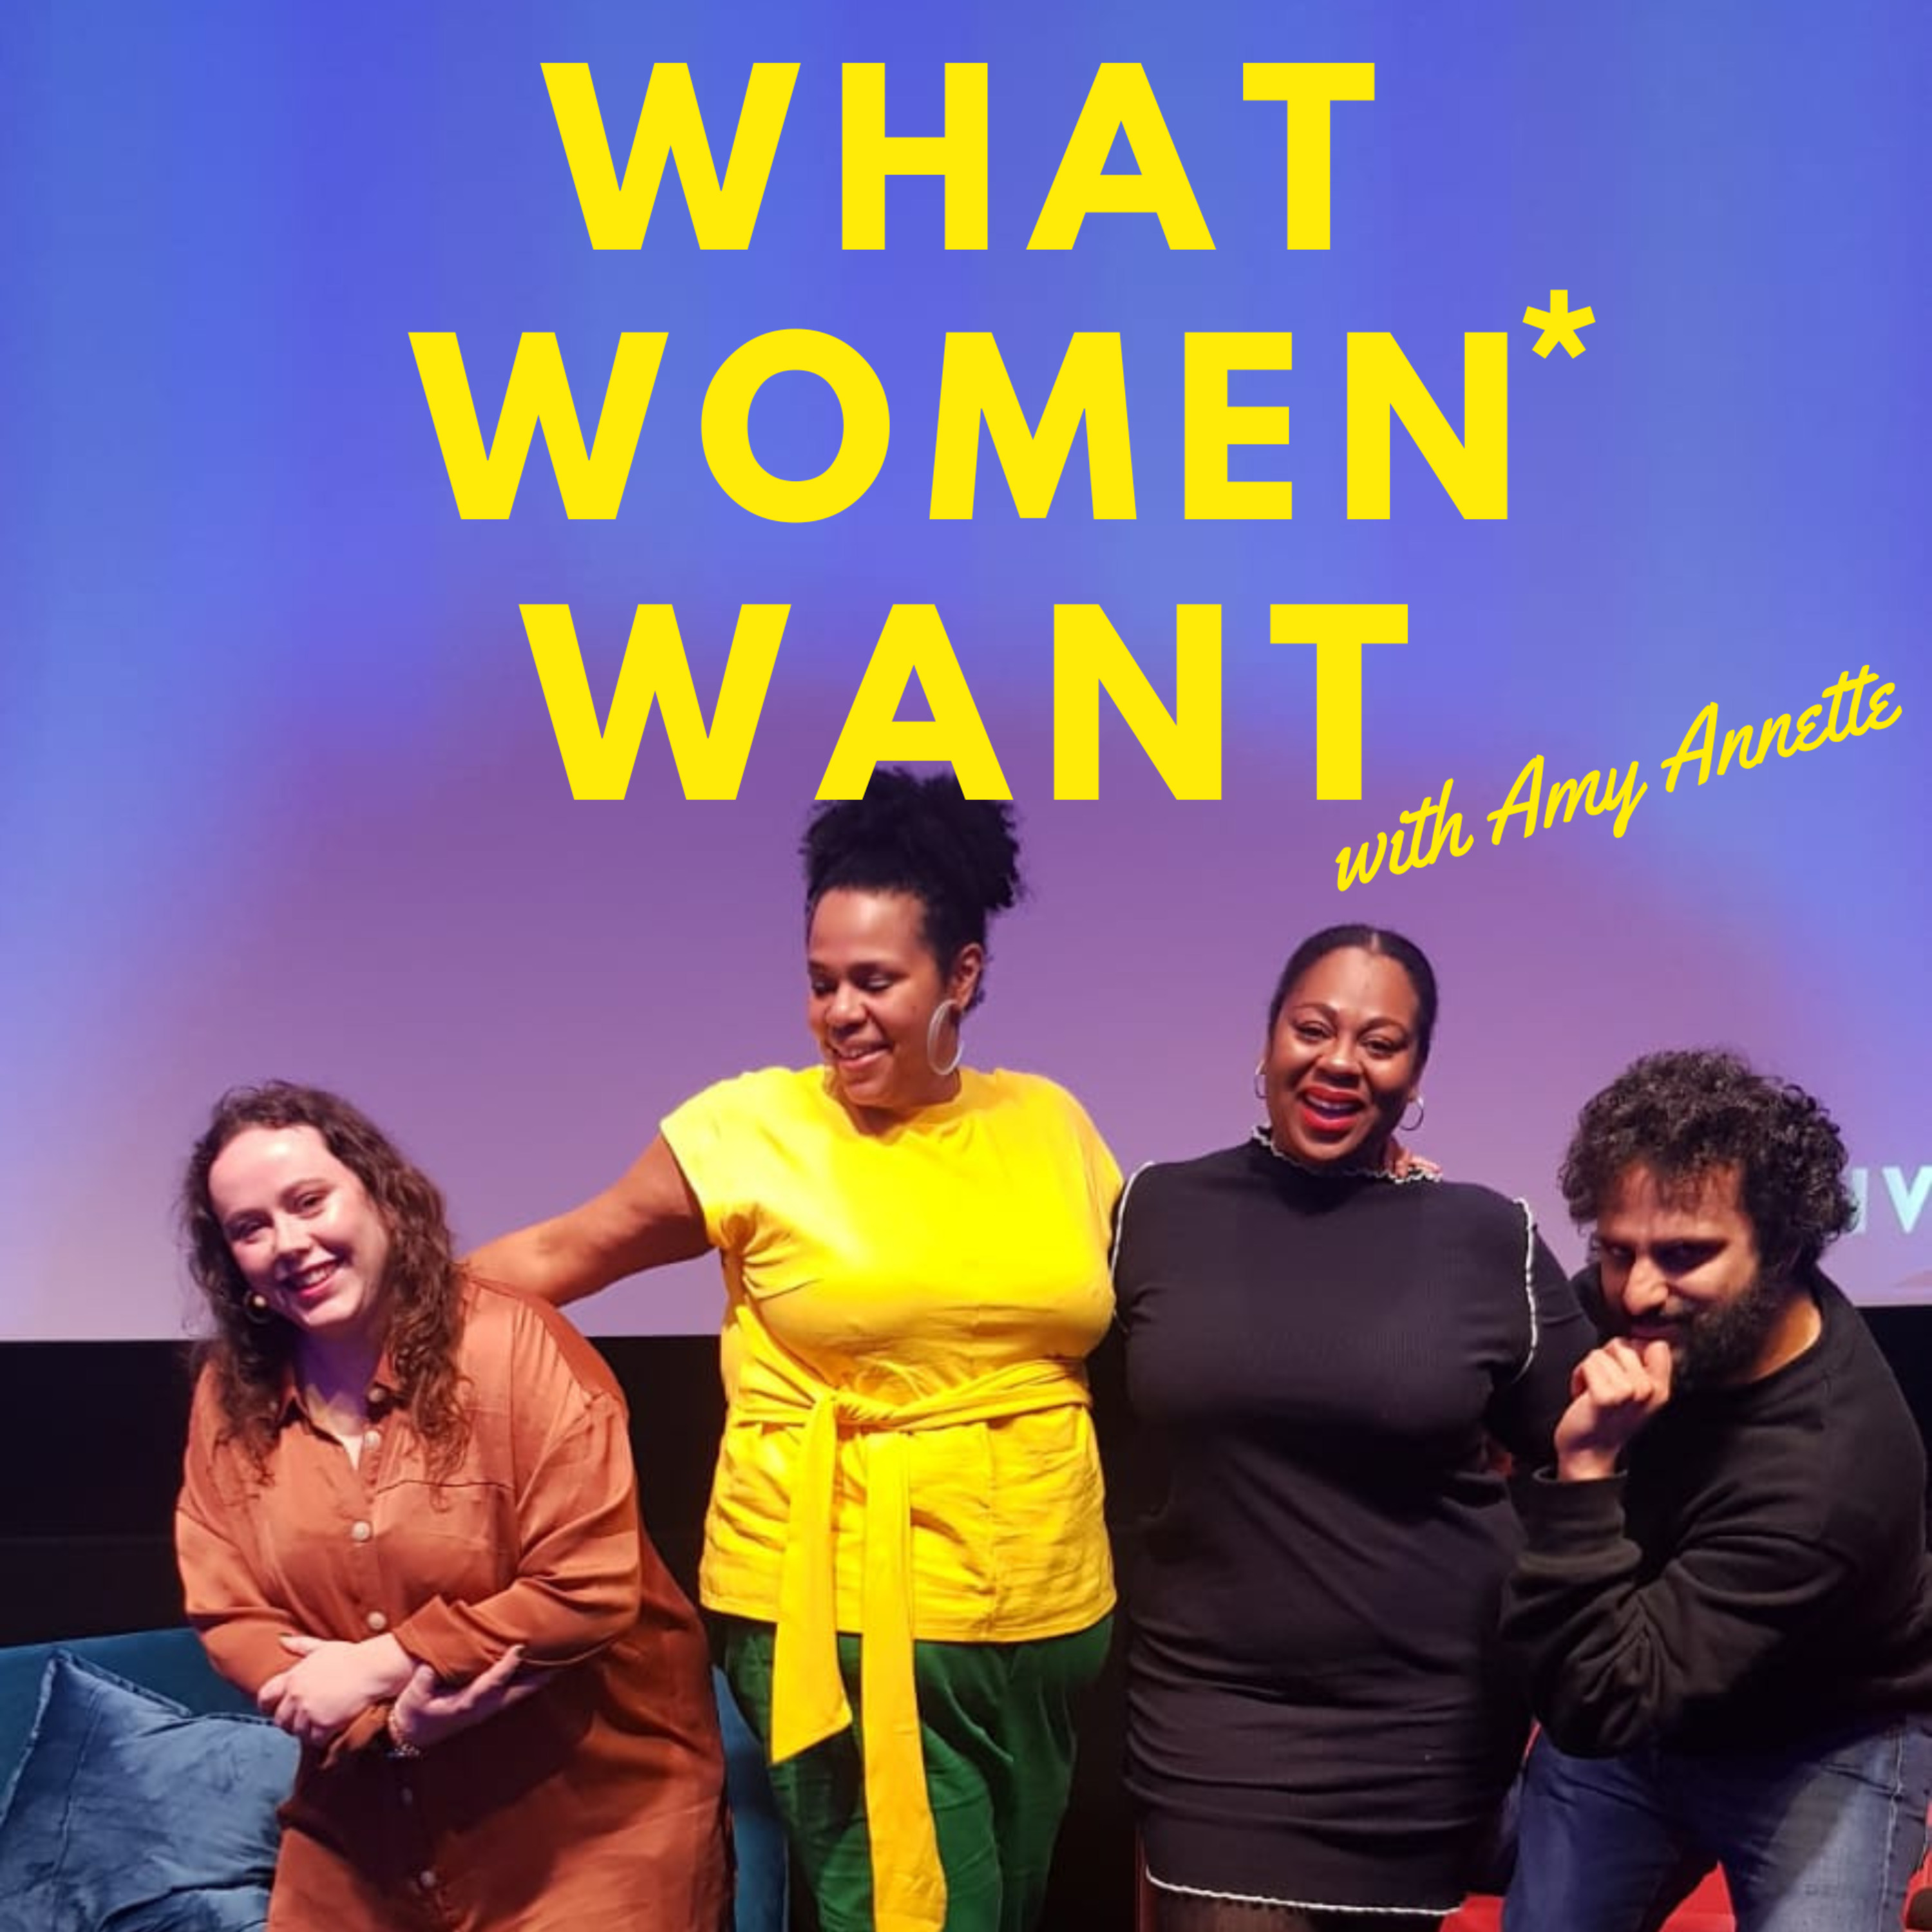 Ask Women Podcast: What Women Want